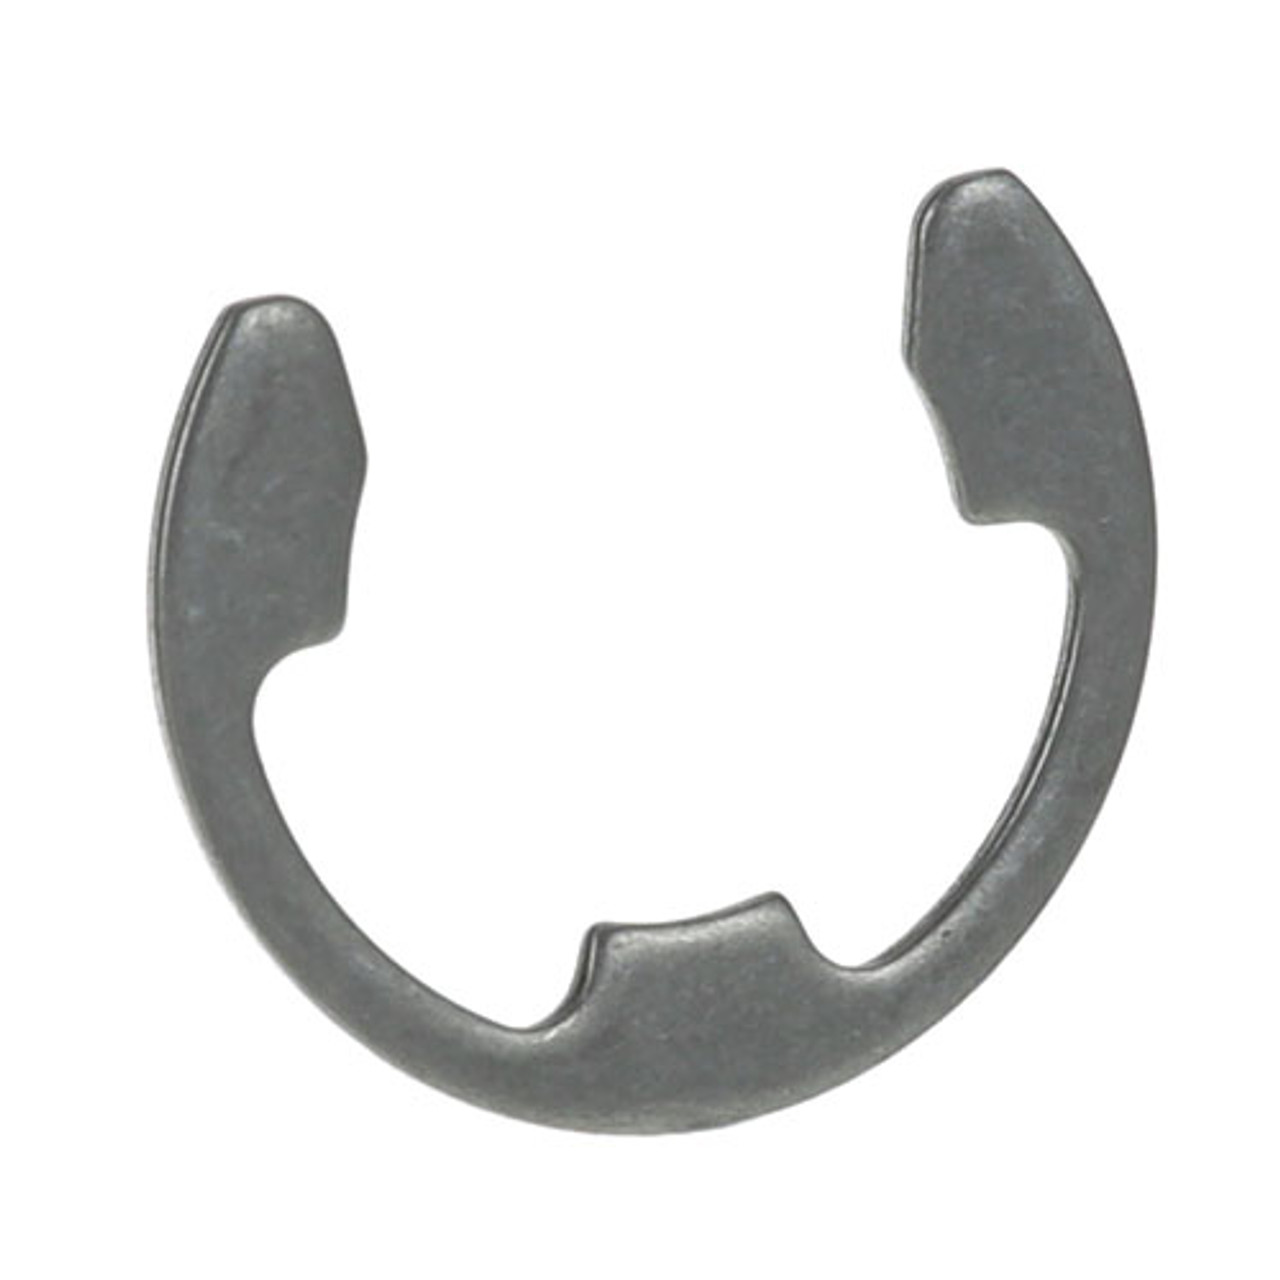 E-Clip - Replacement Part For Hobart RR-10-13